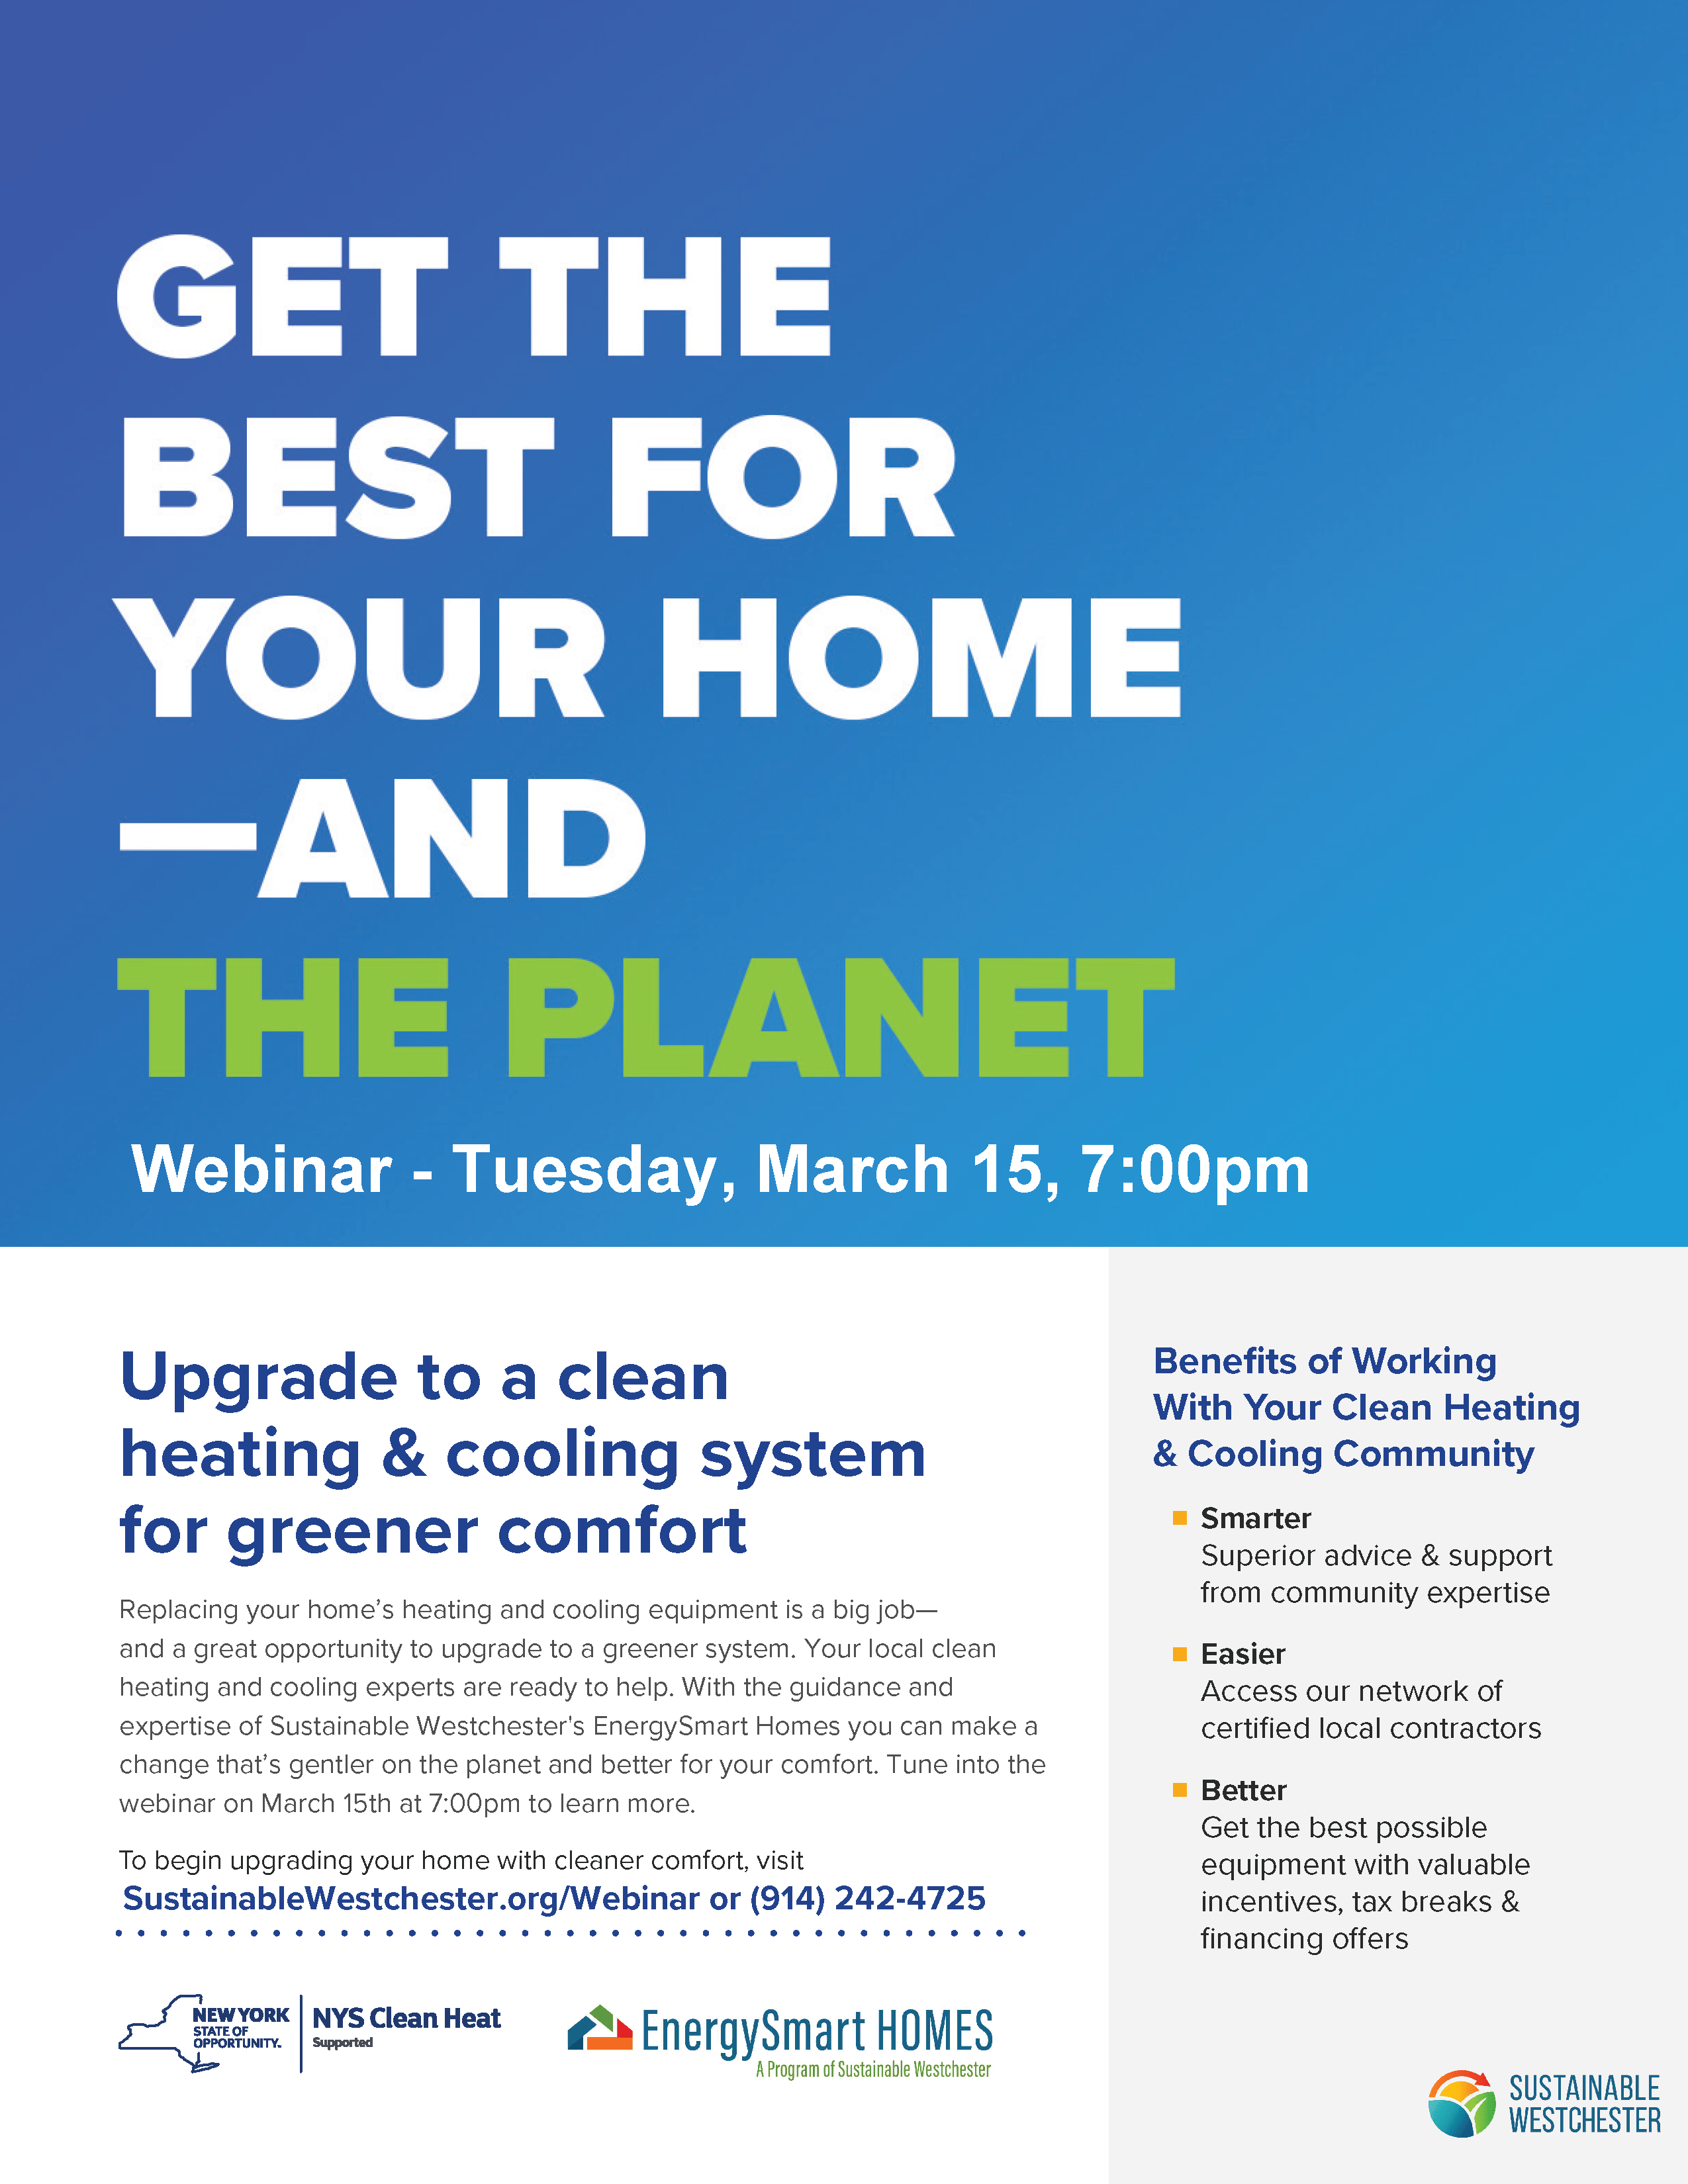 Get the Best for your Home – And the Planet. The Best for Your Home – and the Planet Webinar • March 15, 2022 • 7:00 pm